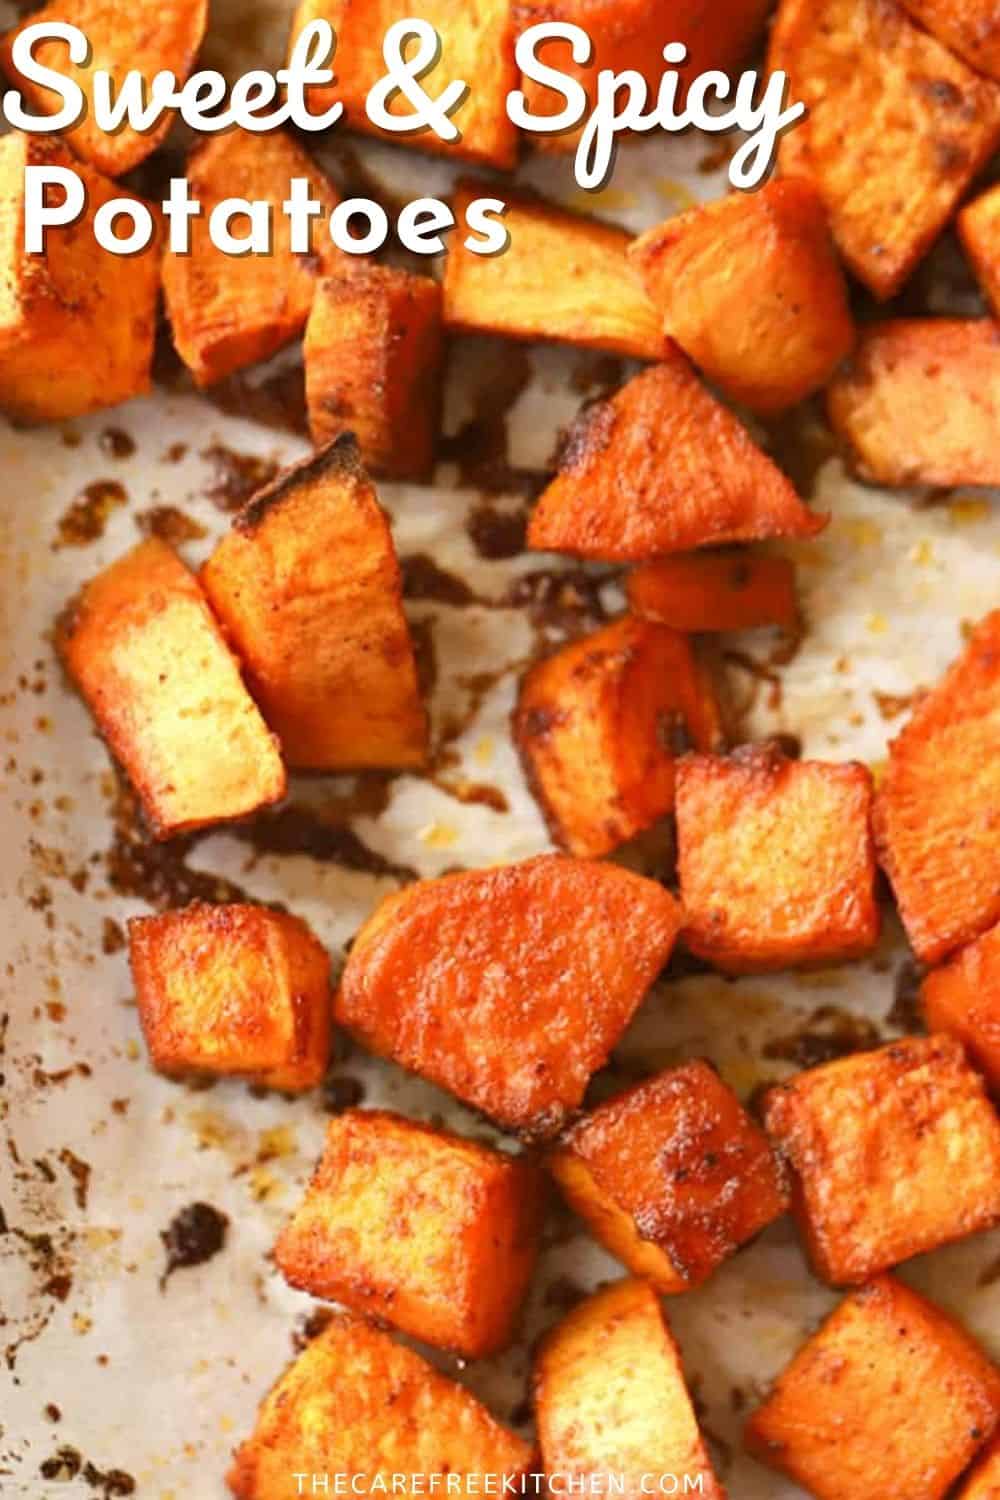 Spicy Roasted Sweet Potatoes - The Carefree Kitchen